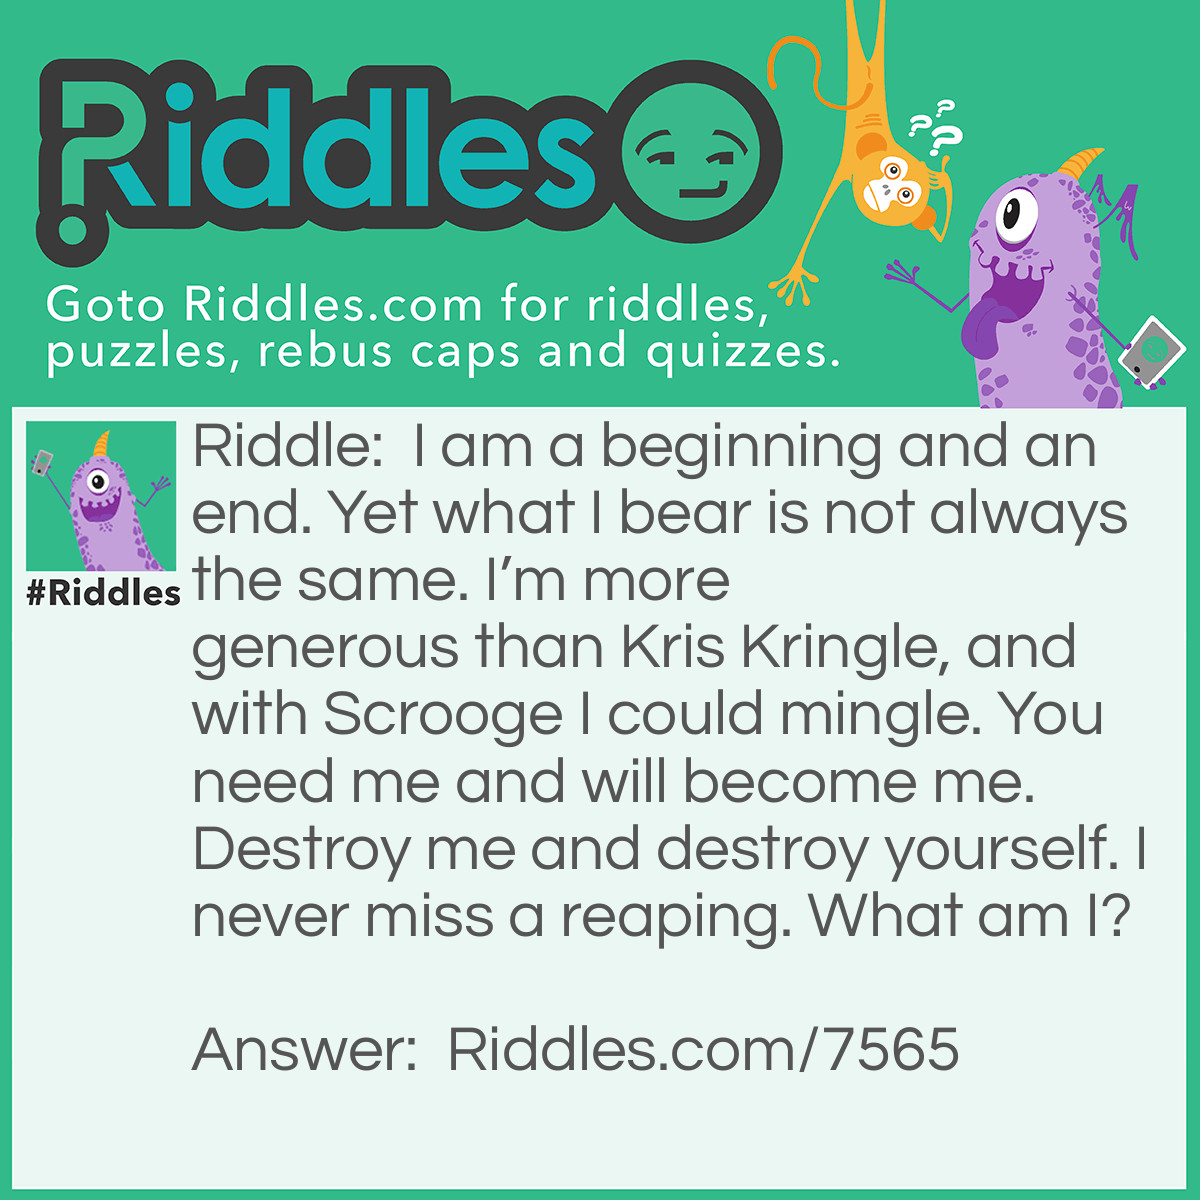 Riddle: I am a beginning and an end. Yet what I bear is not always the same. I'm more generous than Kris Kringle, and with Scrooge I could mingle. You need me and will become me. Destroy me and destroy yourself. I never miss a reaping. What am I? Answer: Soil.